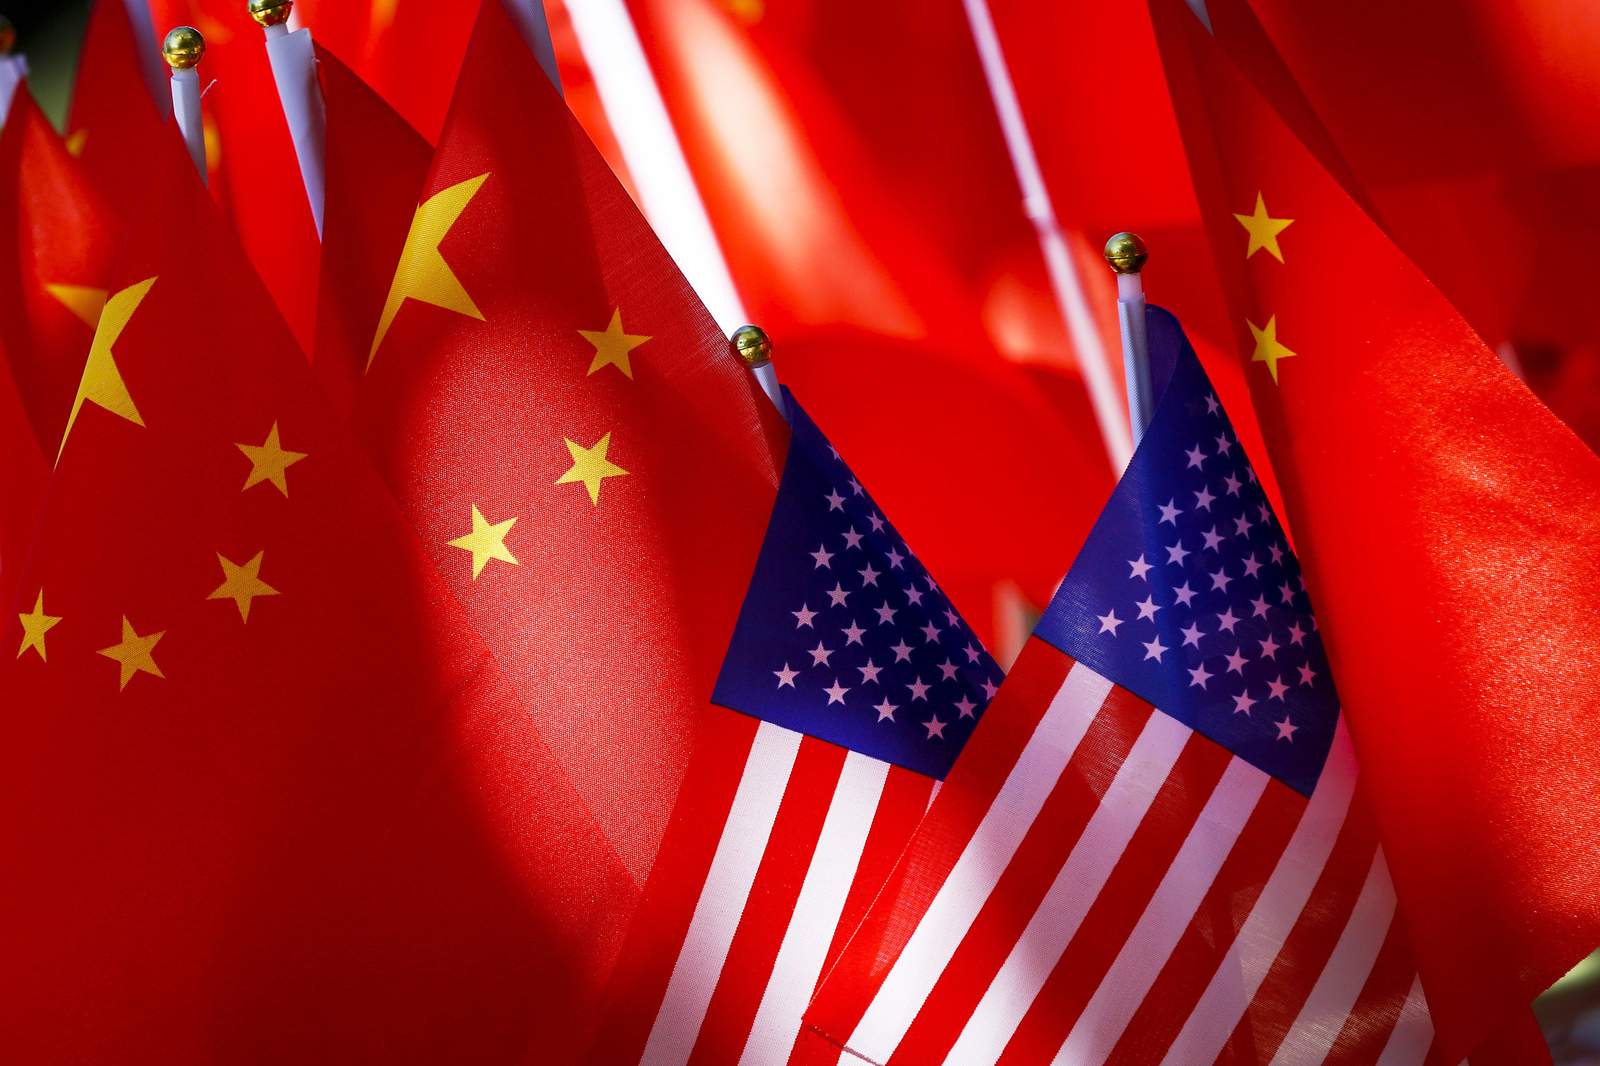 Always rocky, China-US relations appear at a turning point